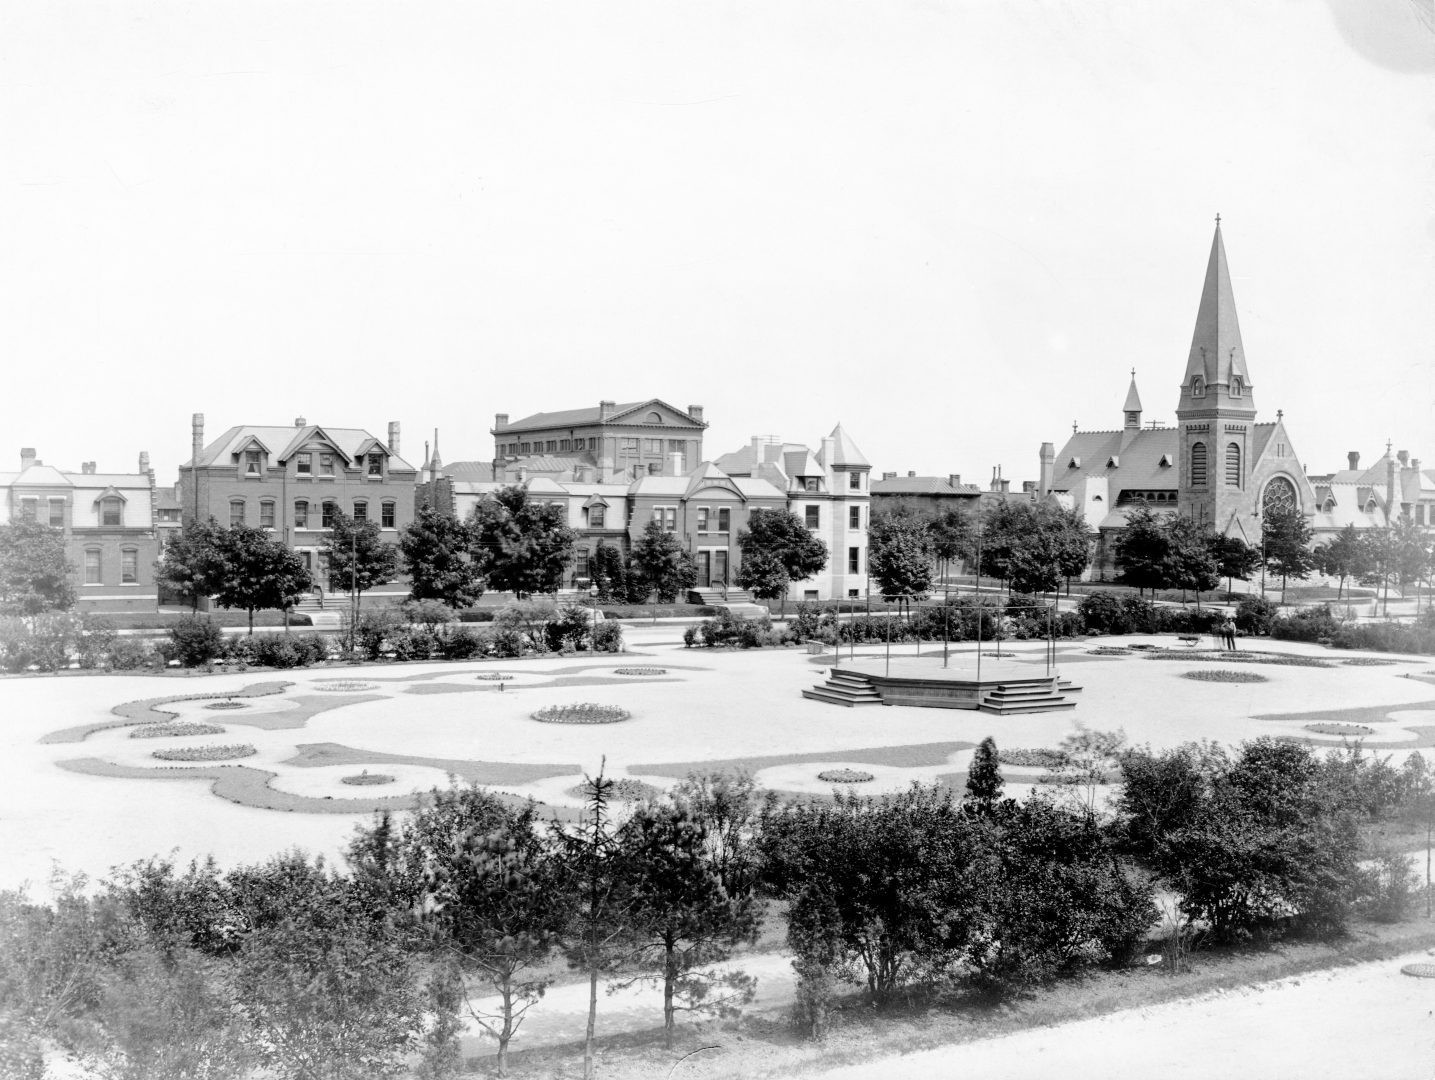 Greenstone Church and the Arcade park in Pullman, Chicago.